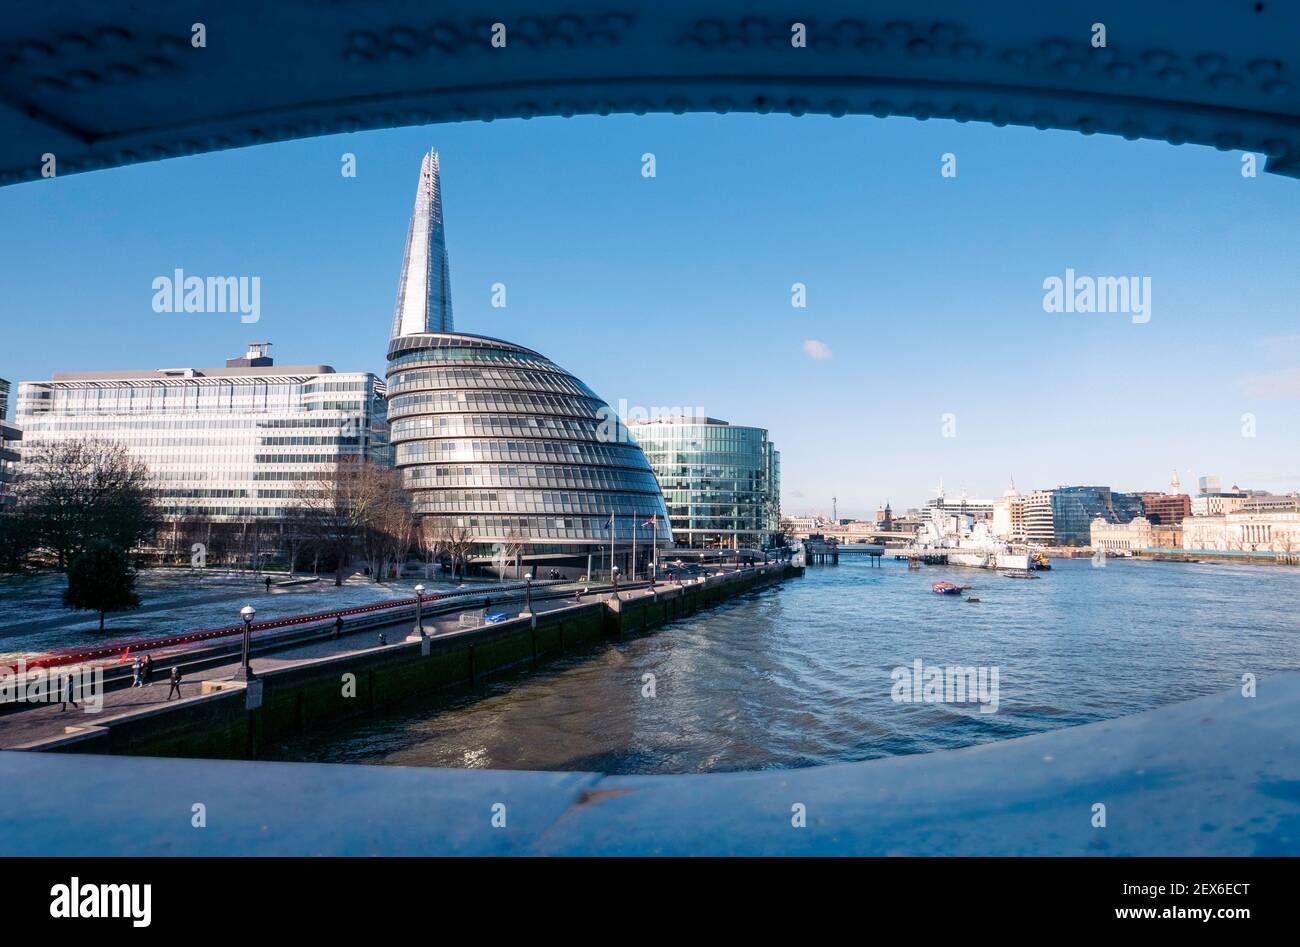 Capital city of London during the 2021 winter lockdown in the UK. Stock Photo